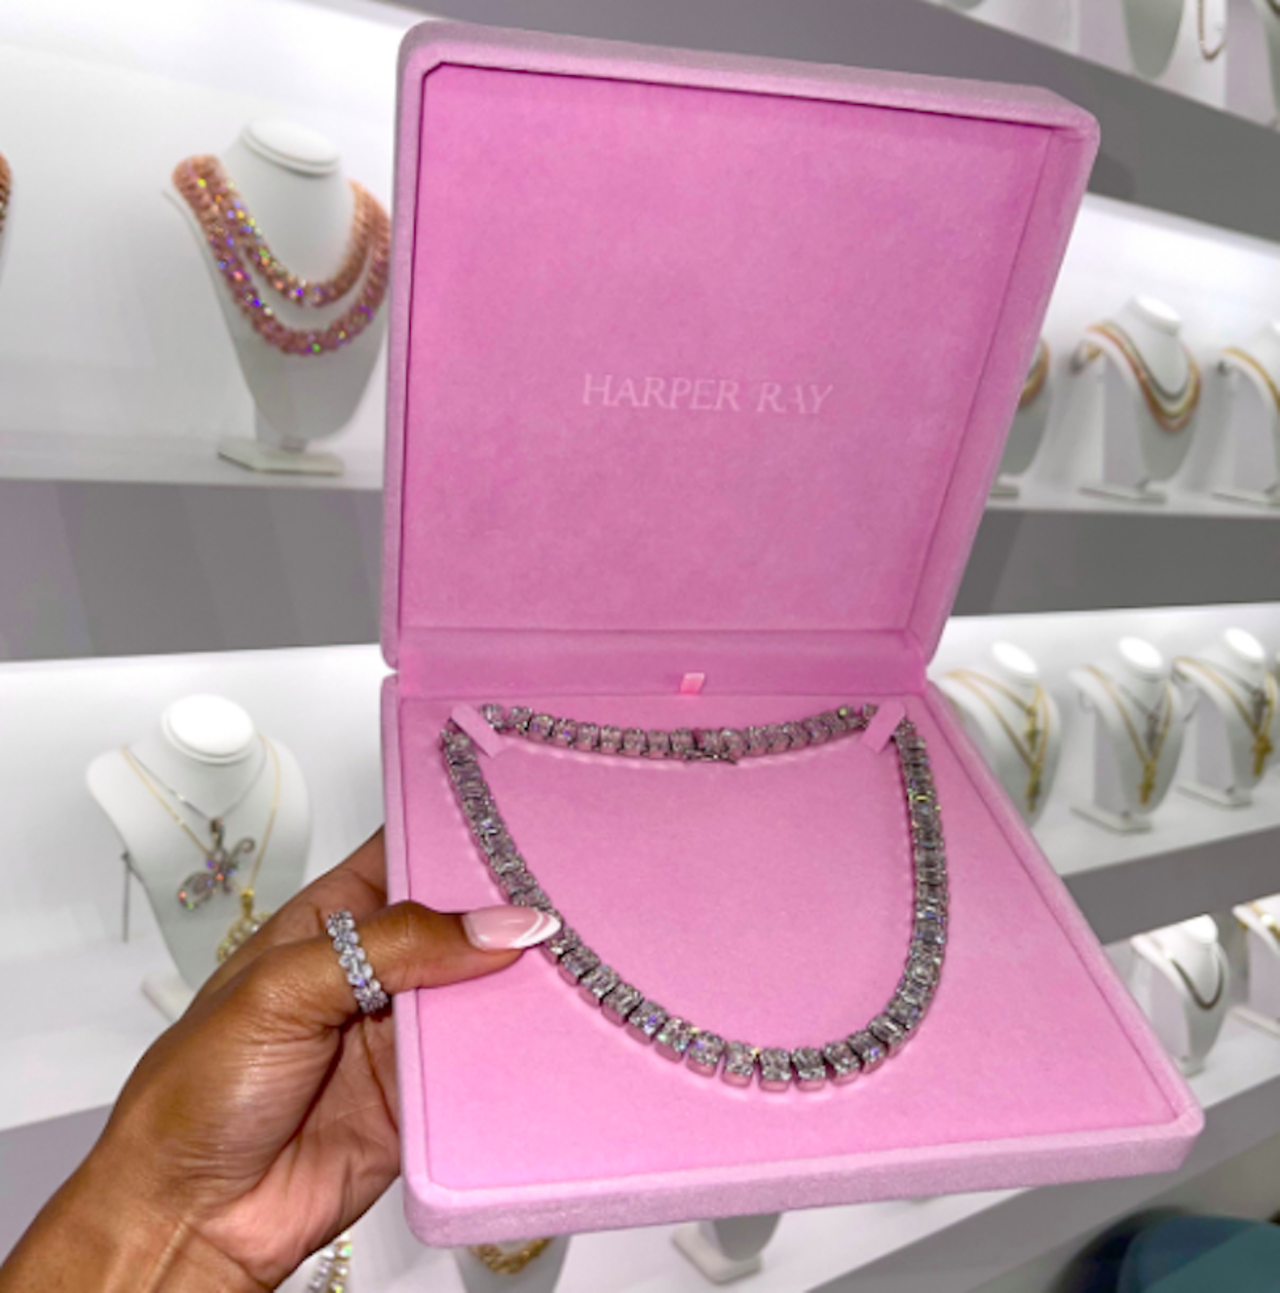 Harper Ray Accessories
29139 Southfield Rd., Southfield; 248-595-7099; shopharperray.com
Kash Doll once said "Ice Me Out" and at Harper Ray, every true Detroit girl gets to live out her iciest dreams for a fraction of the cost.